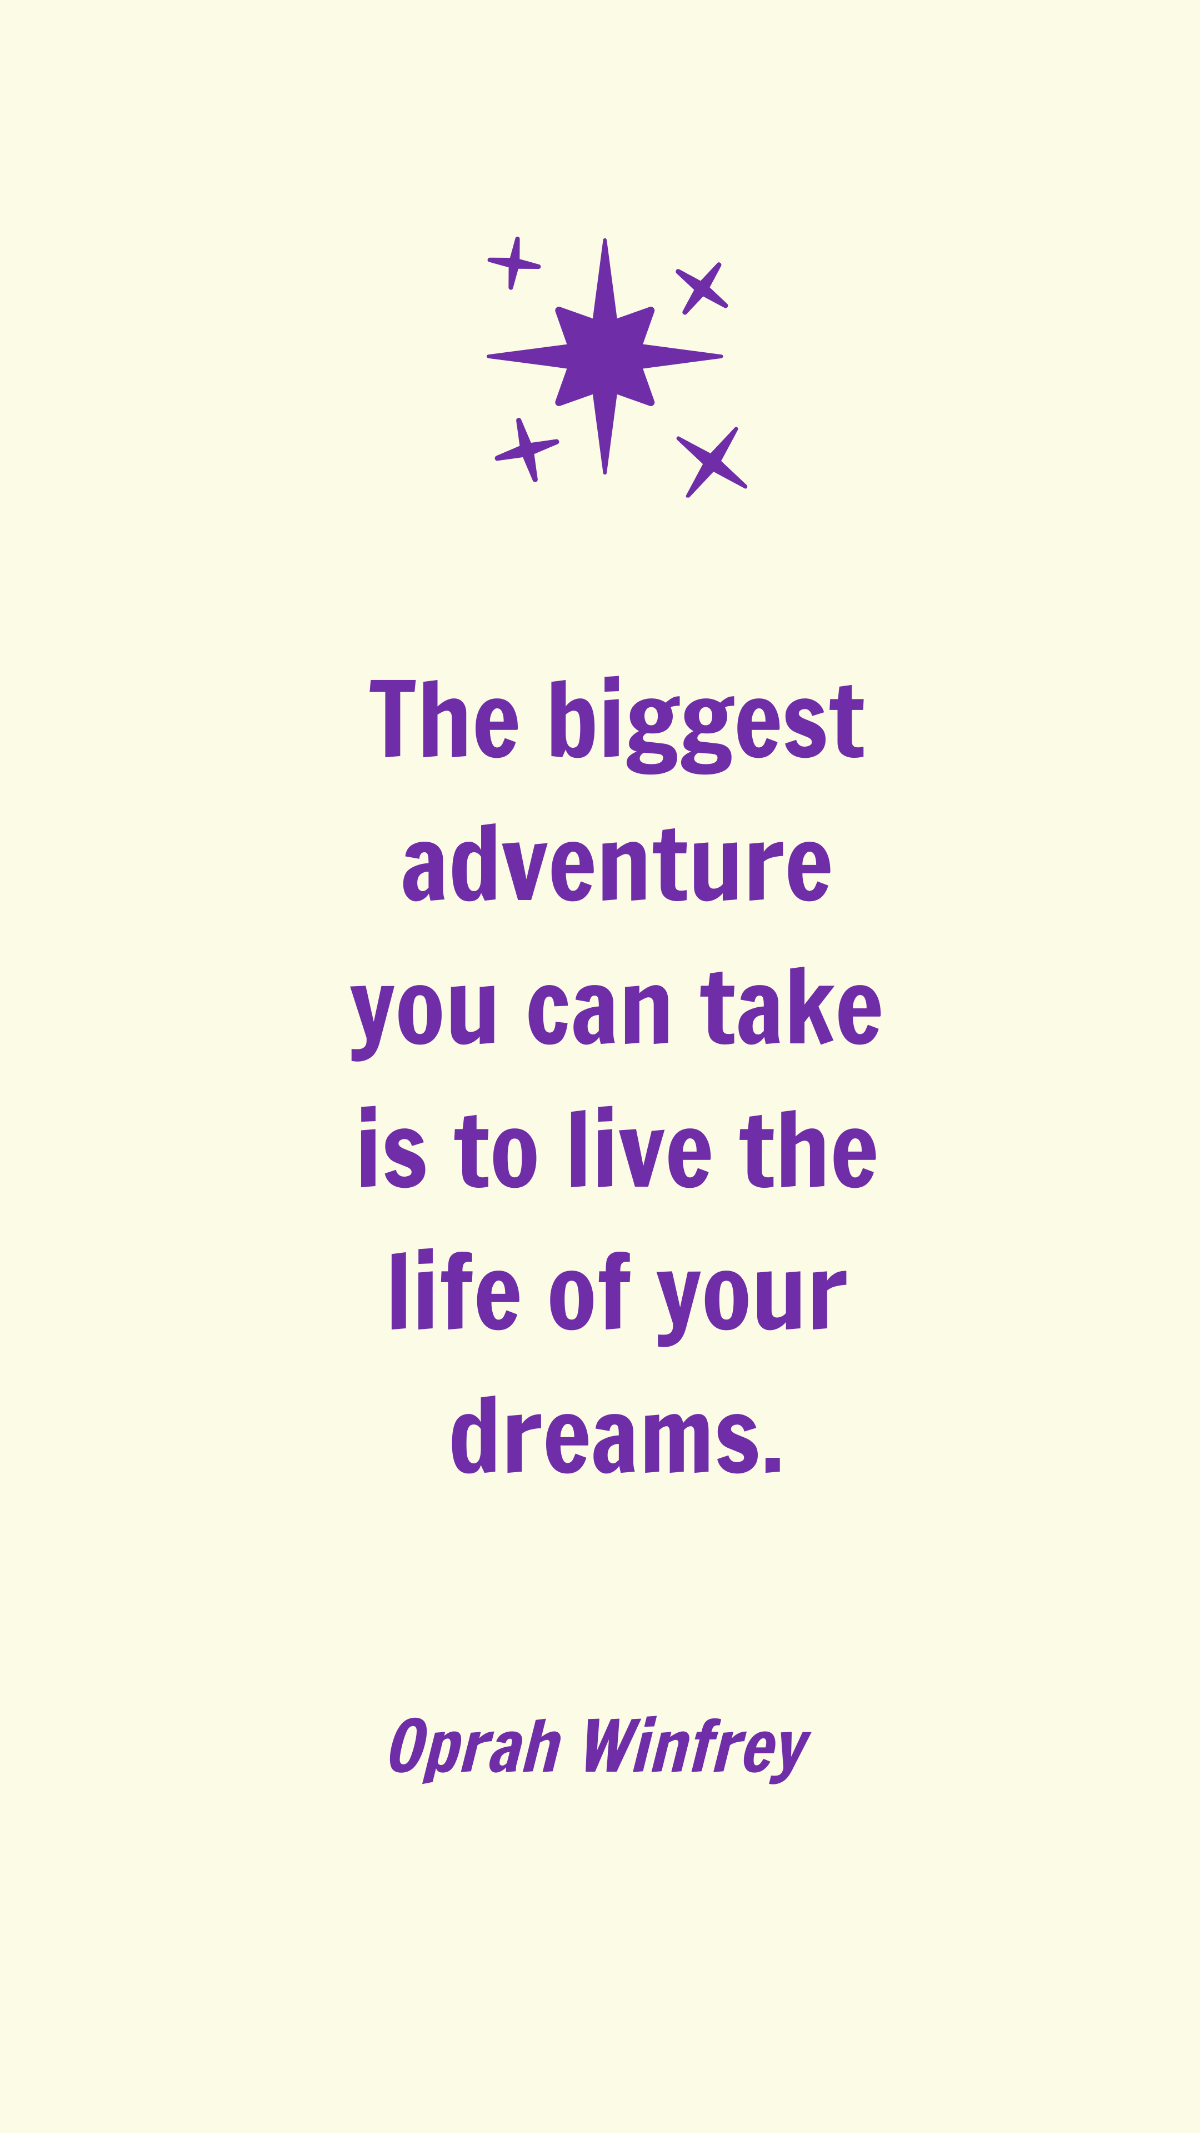 Free Oprah Winfrey - The biggest adventure you can take is to live the life of your dreams. Template